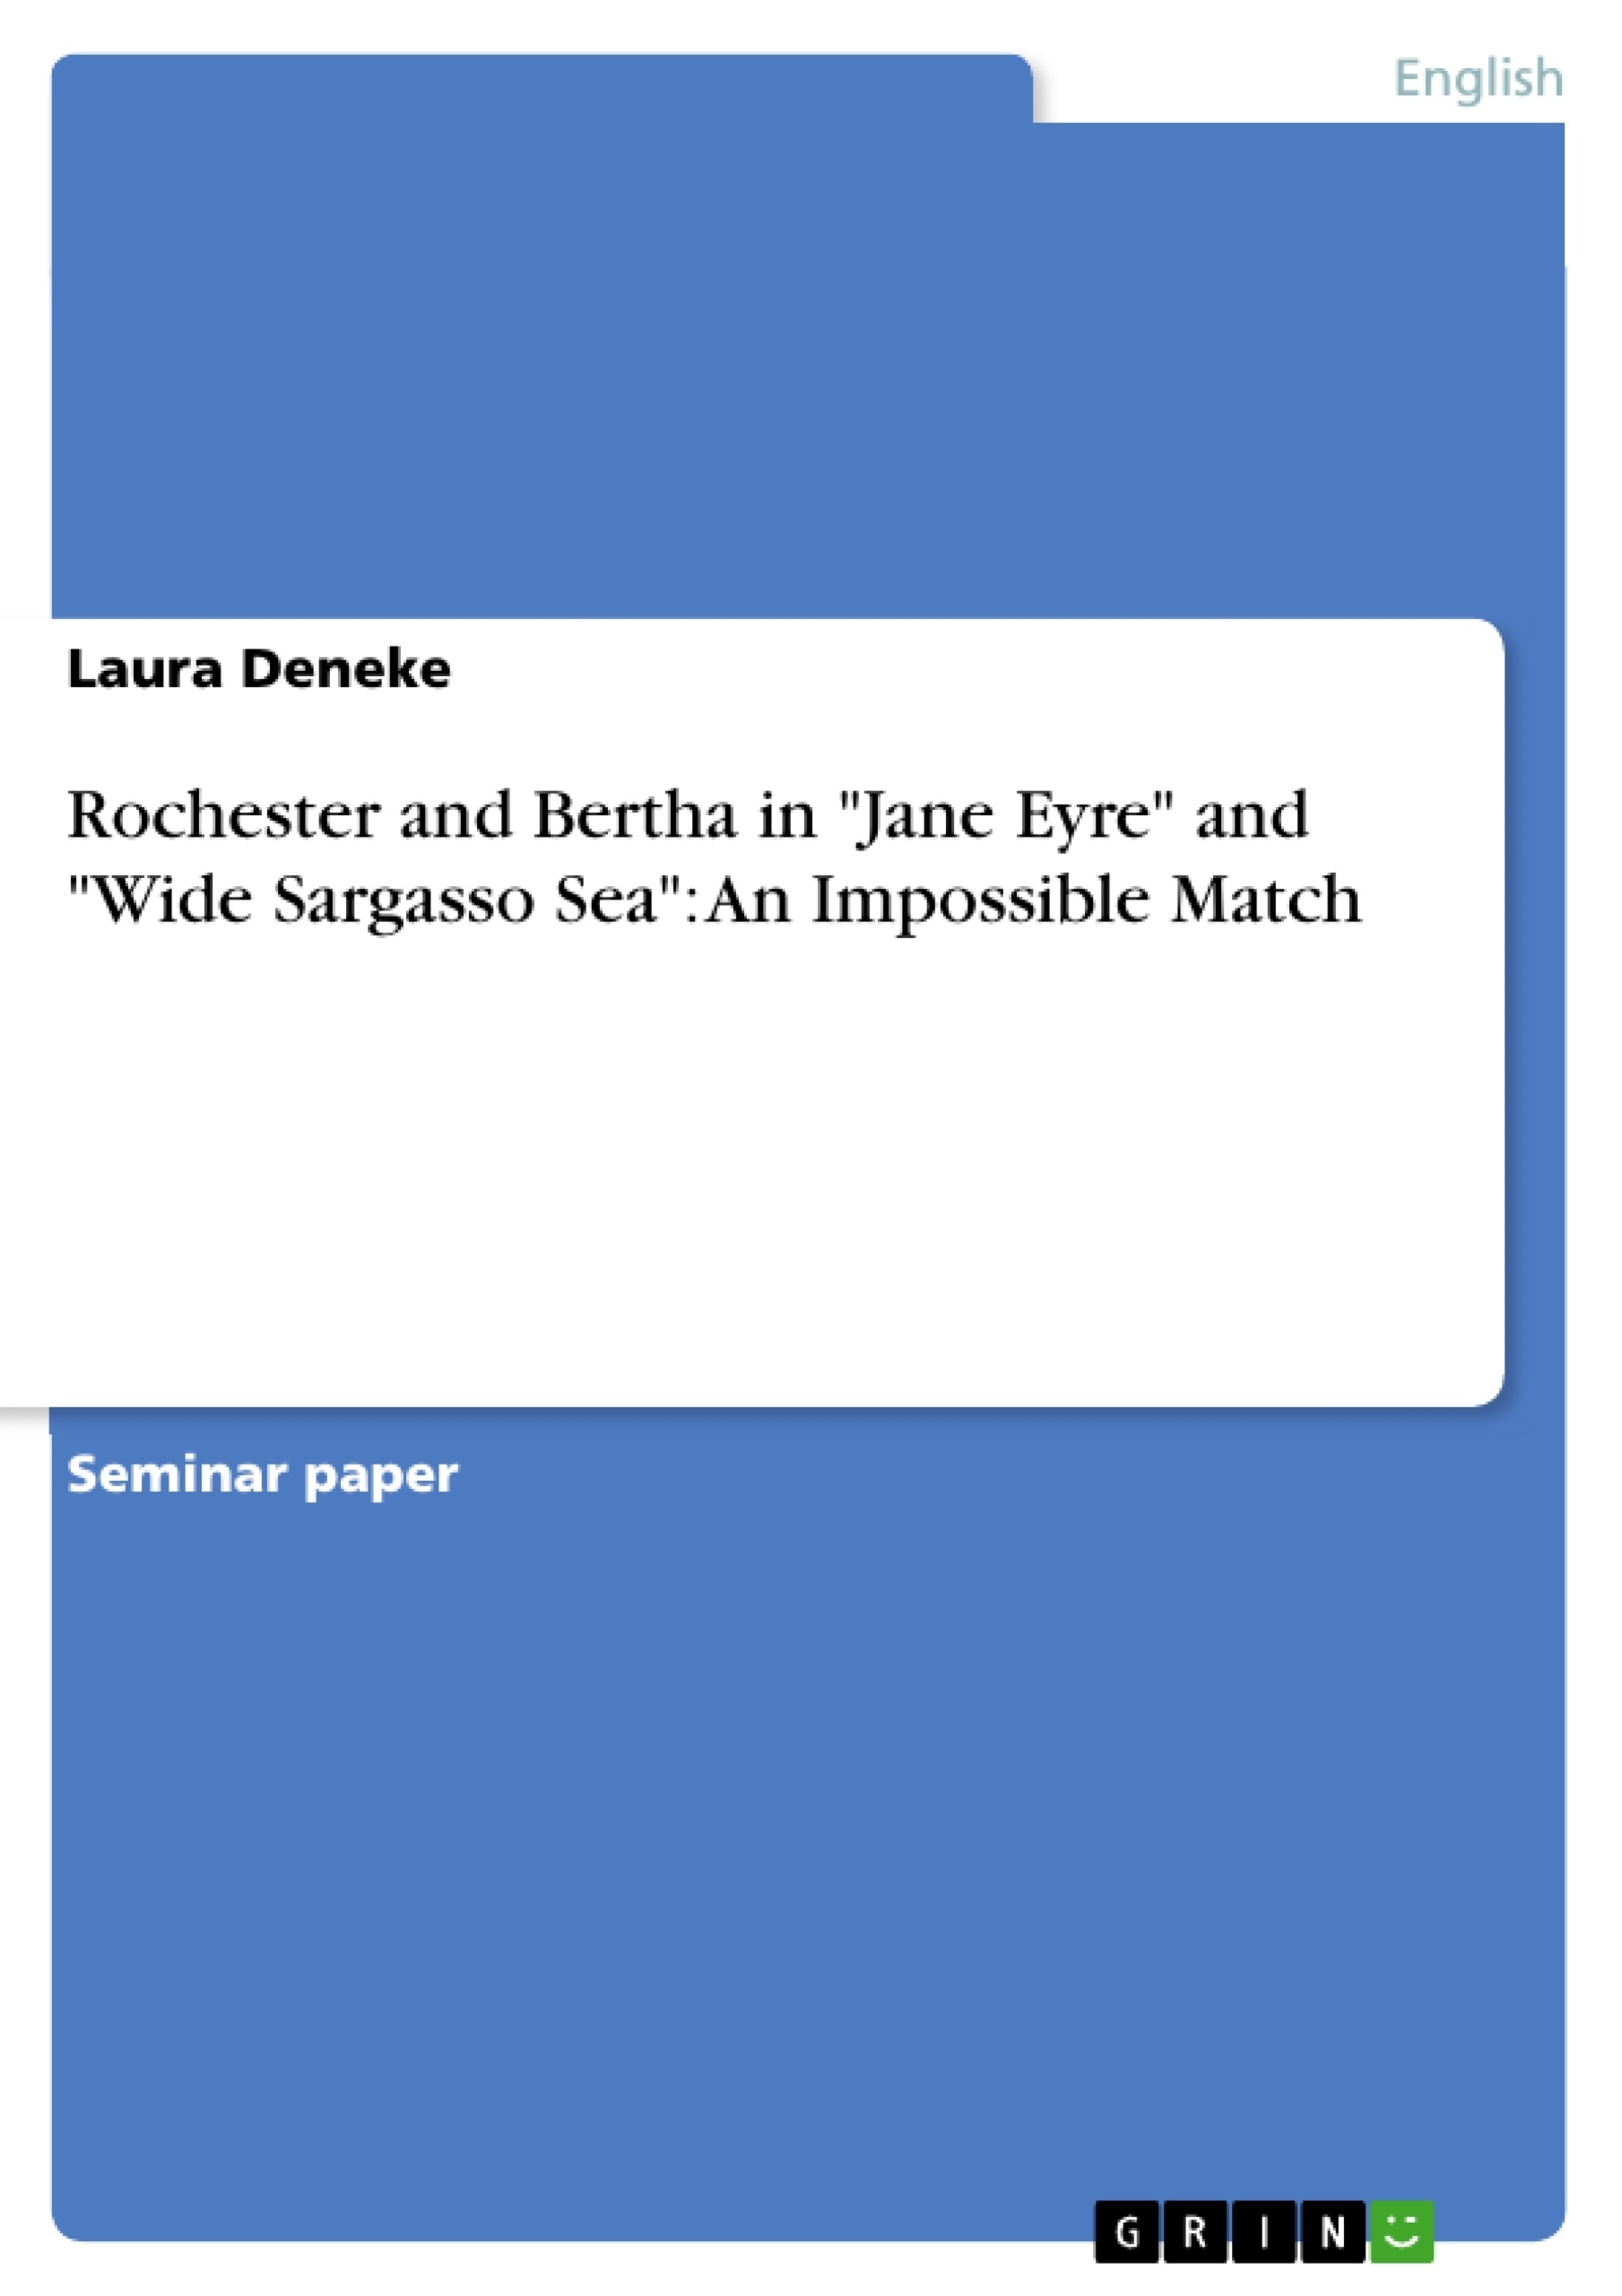 Titre: Rochester and Bertha in "Jane Eyre" and "Wide Sargasso Sea": An Impossible Match